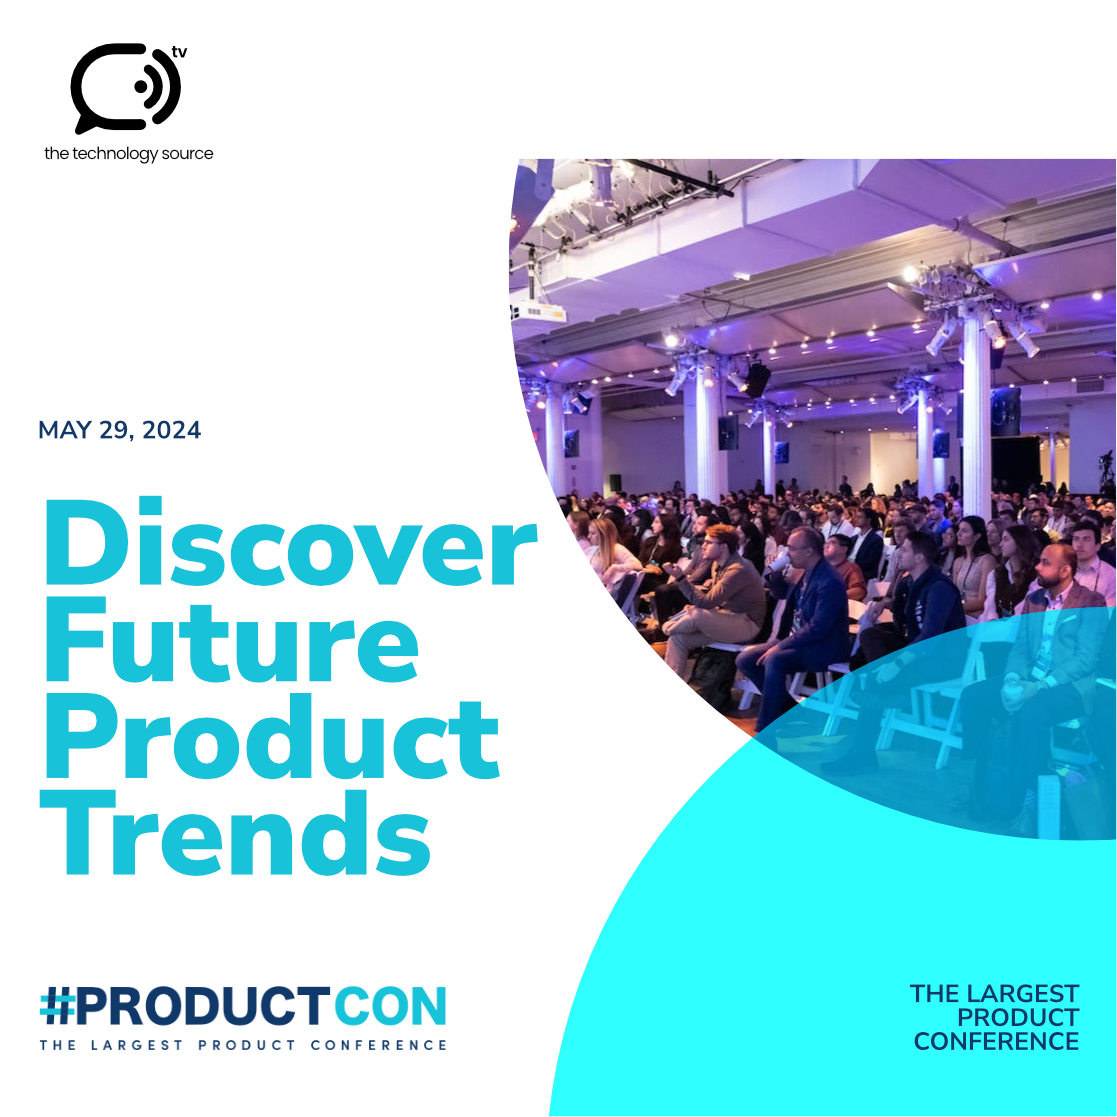 1/3 NYC ProductCon 2024: Shape the Future of Product Management

ProductCon New York 2024 is a conference focused on product management, happening on May 29th, 2024. It's organized by Product School

The conference offers a chance for product professionals to learn about...